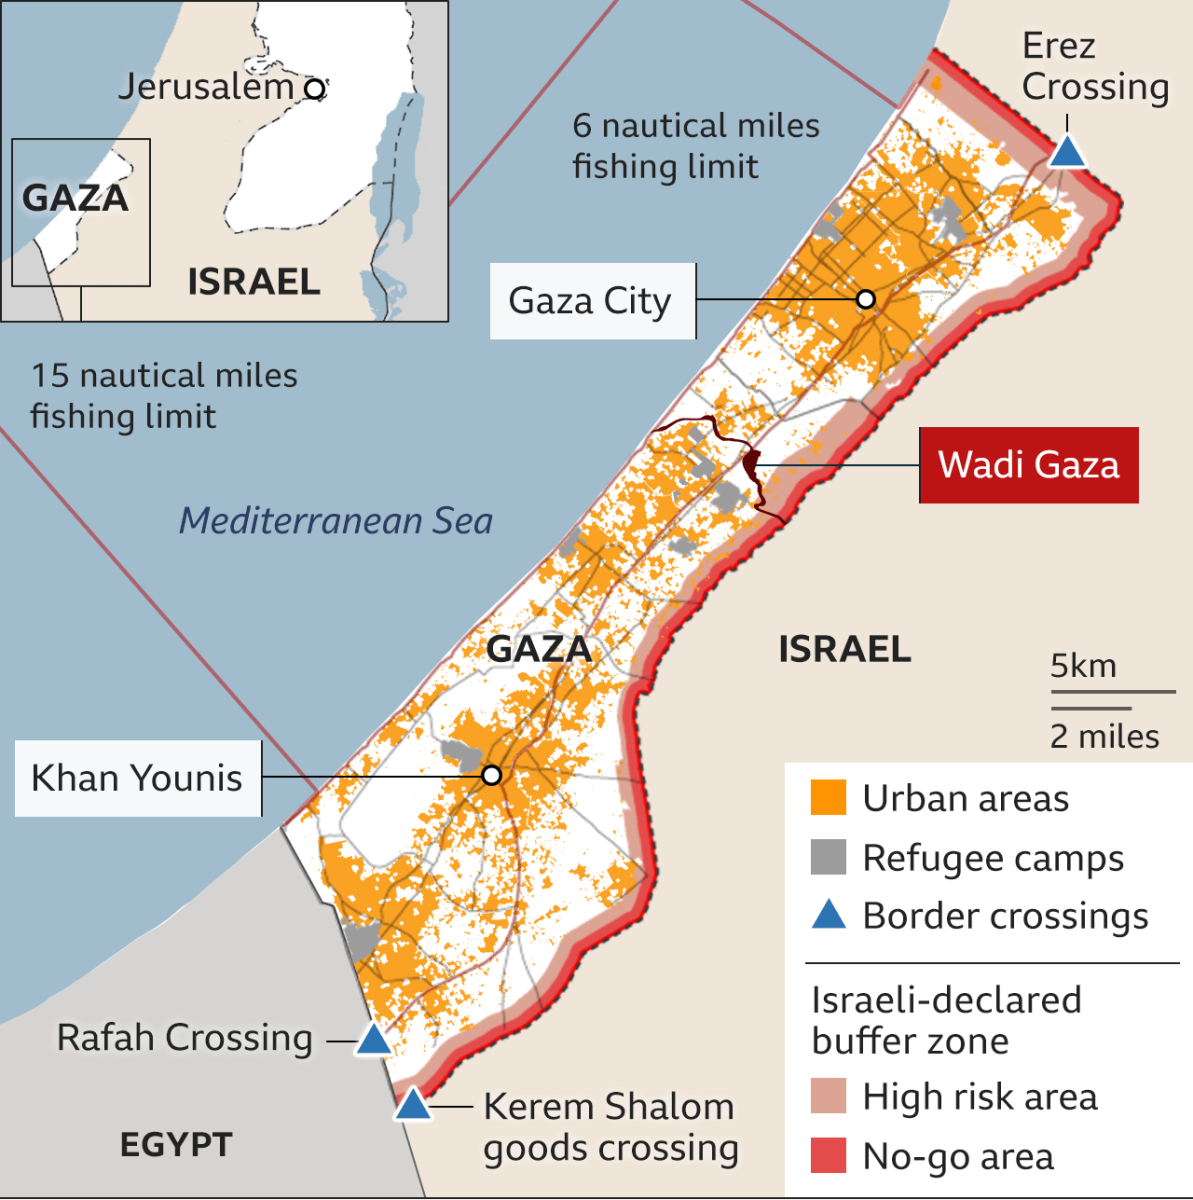 A map of the Gaza Strip, including current urban areas, high risk areas, and border crossings. 